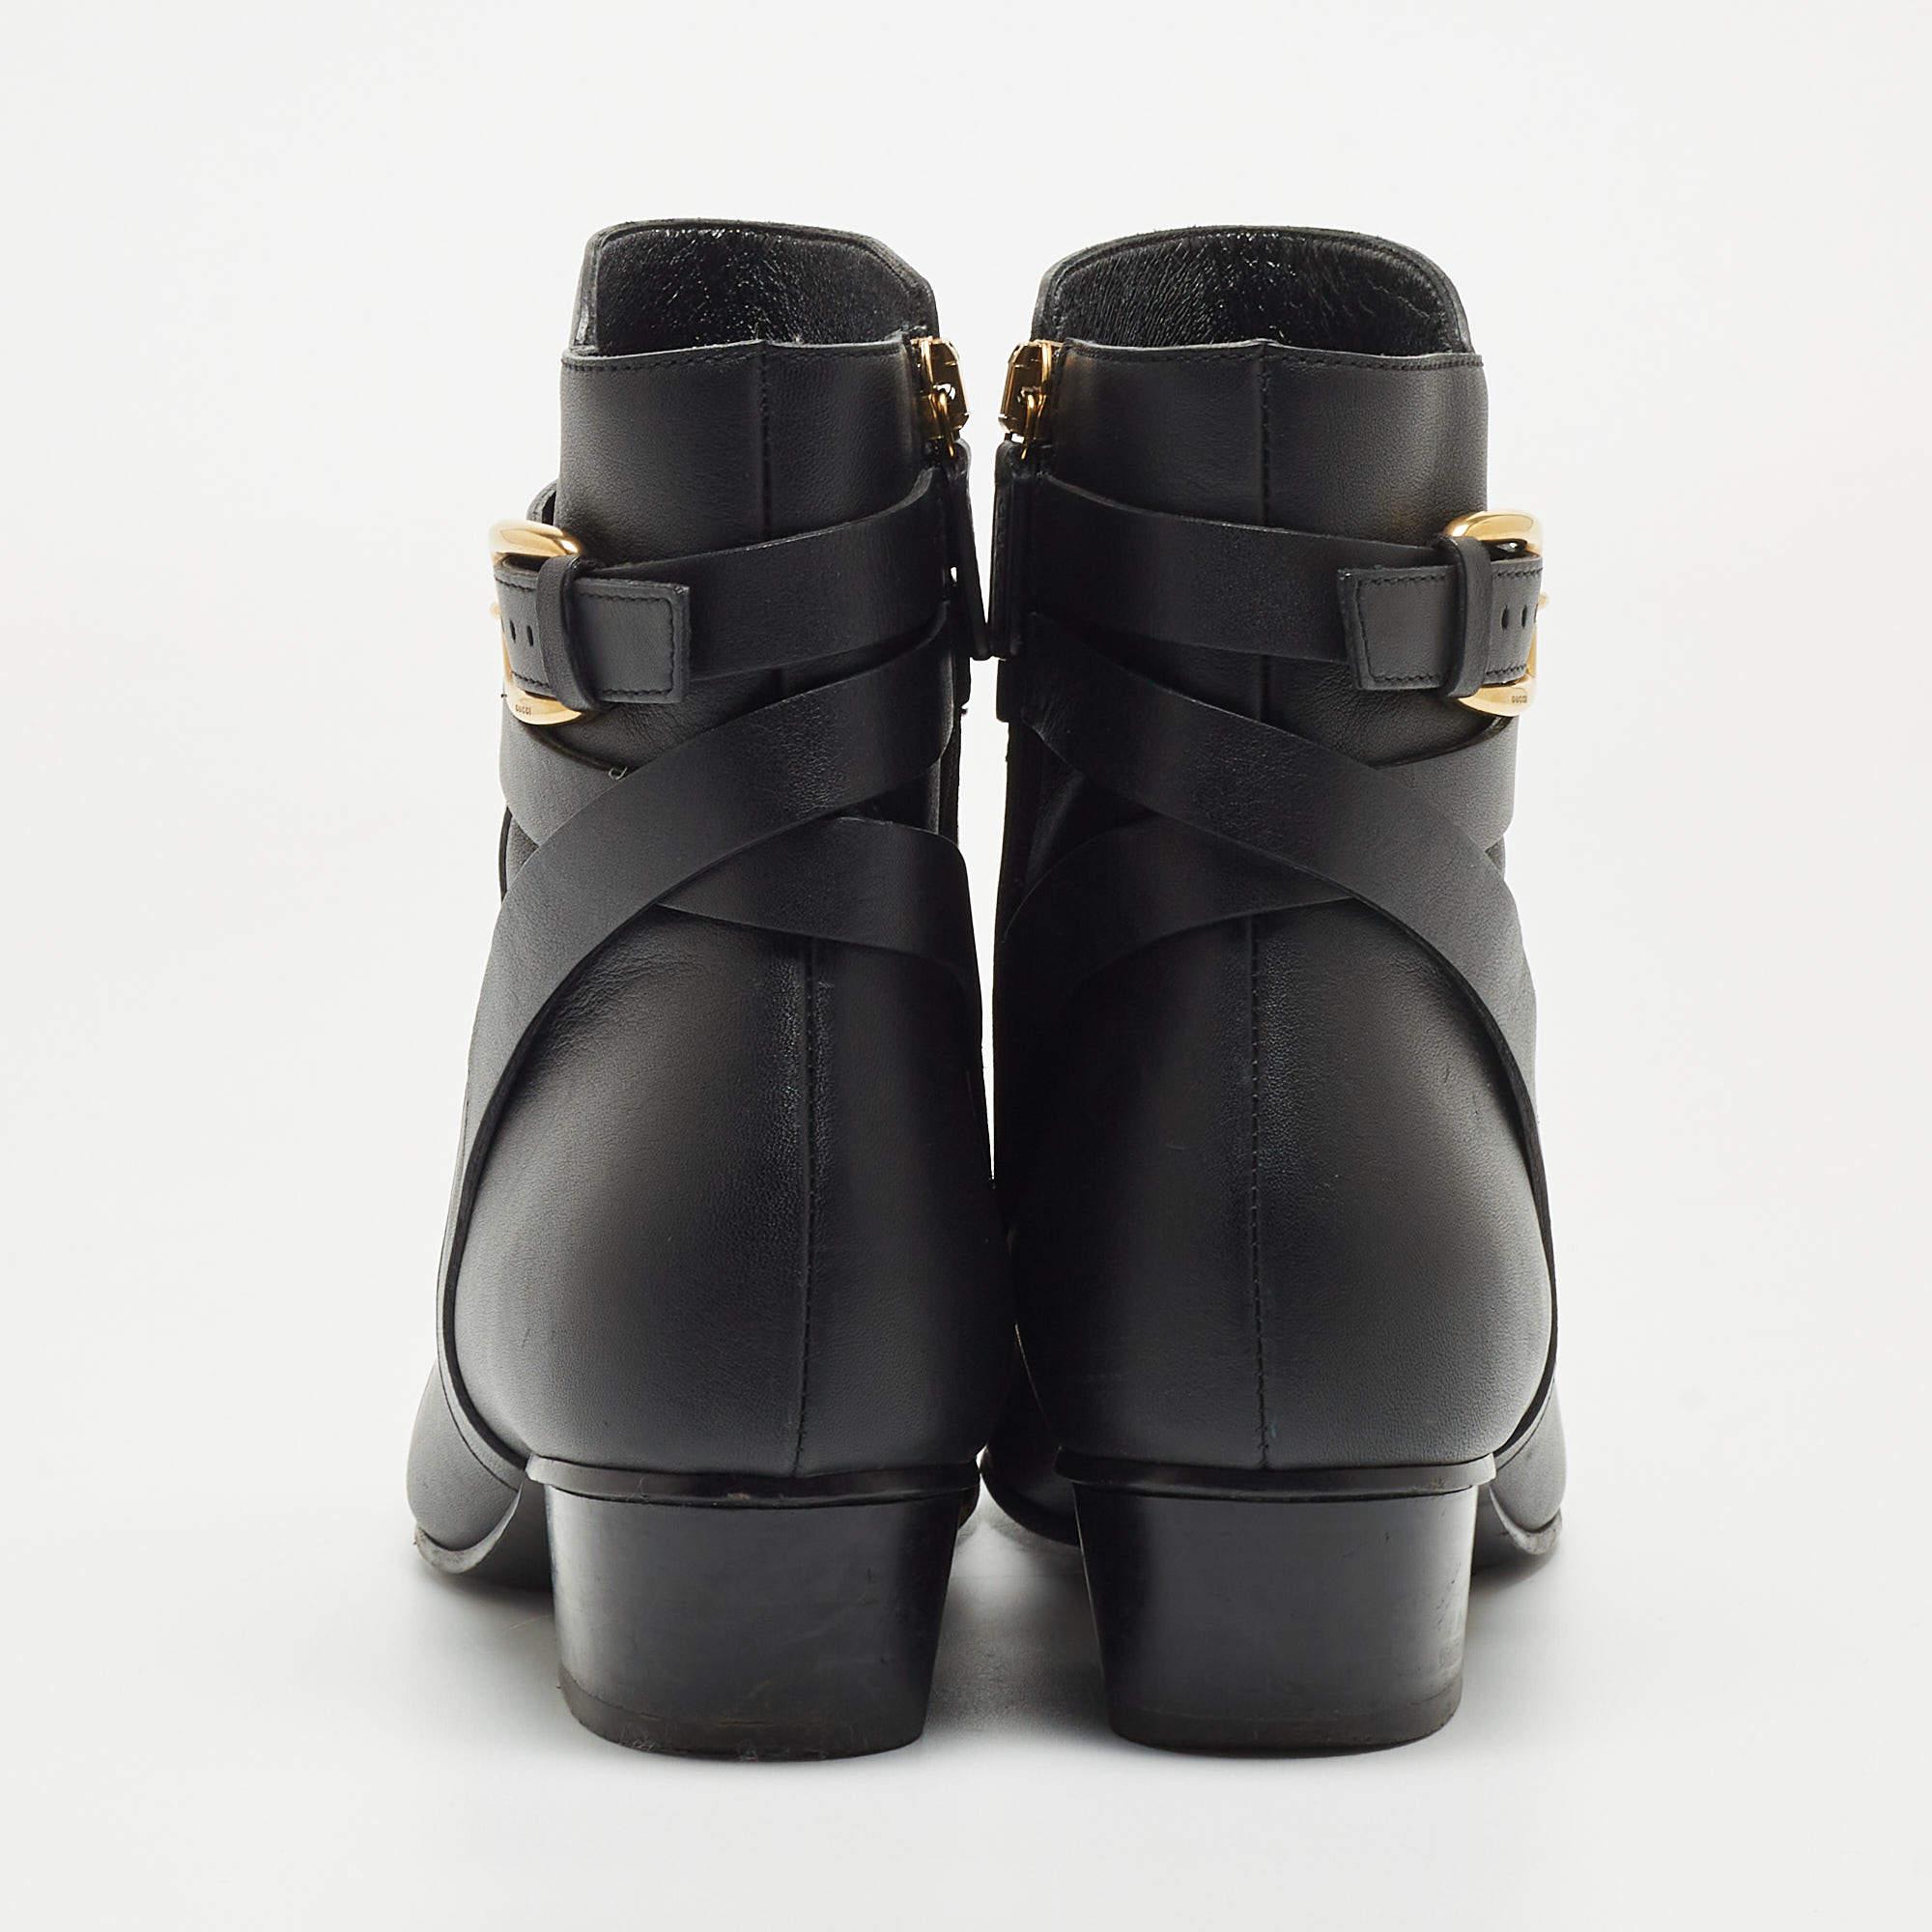 Gucci Black Leather Buckle Detail Ankle Booties  In Good Condition For Sale In Dubai, Al Qouz 2